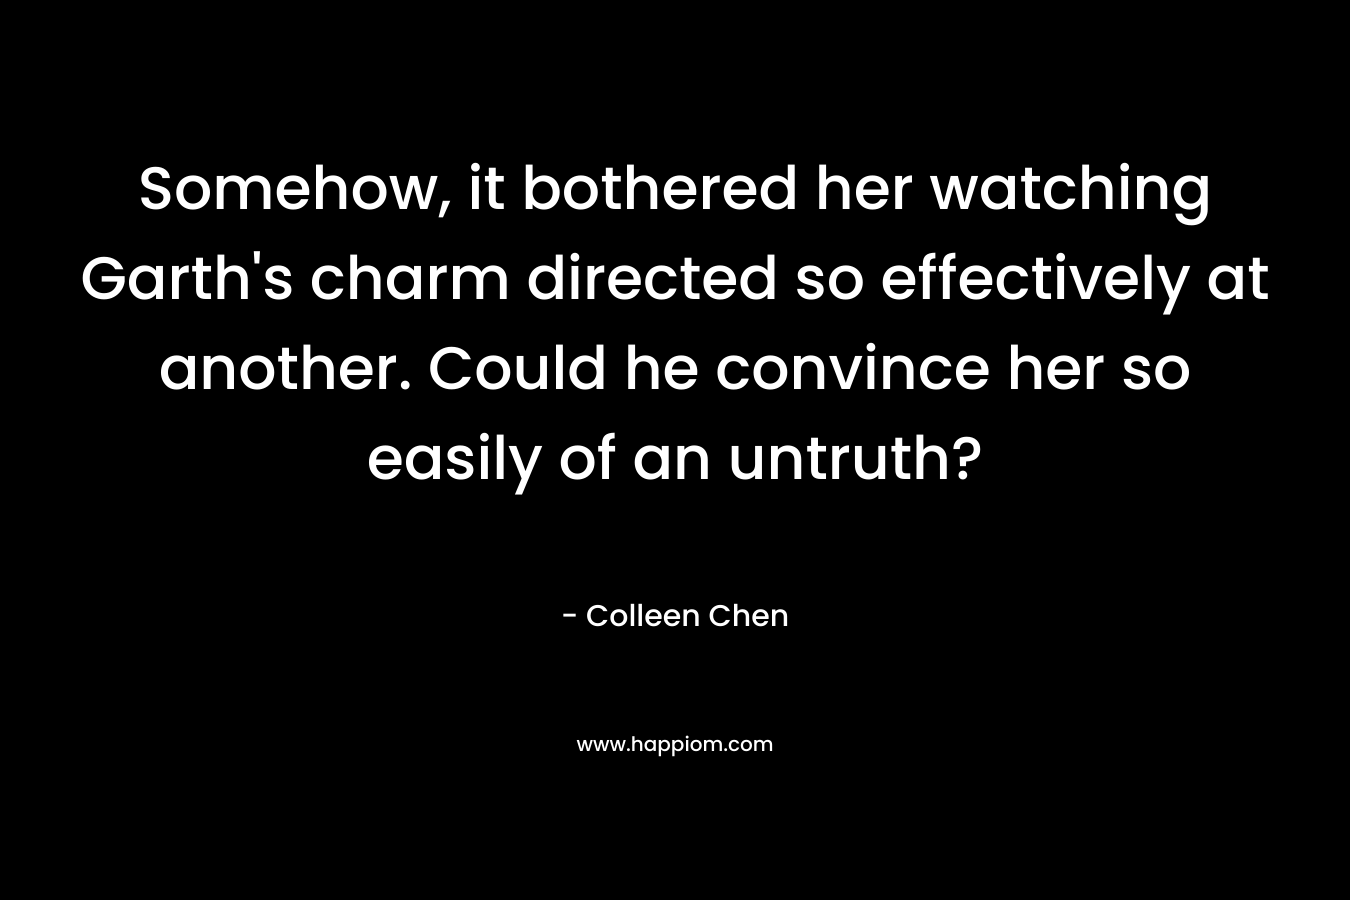 Somehow, it bothered her watching Garth’s charm directed so effectively at another. Could he convince her so easily of an untruth? – Colleen Chen